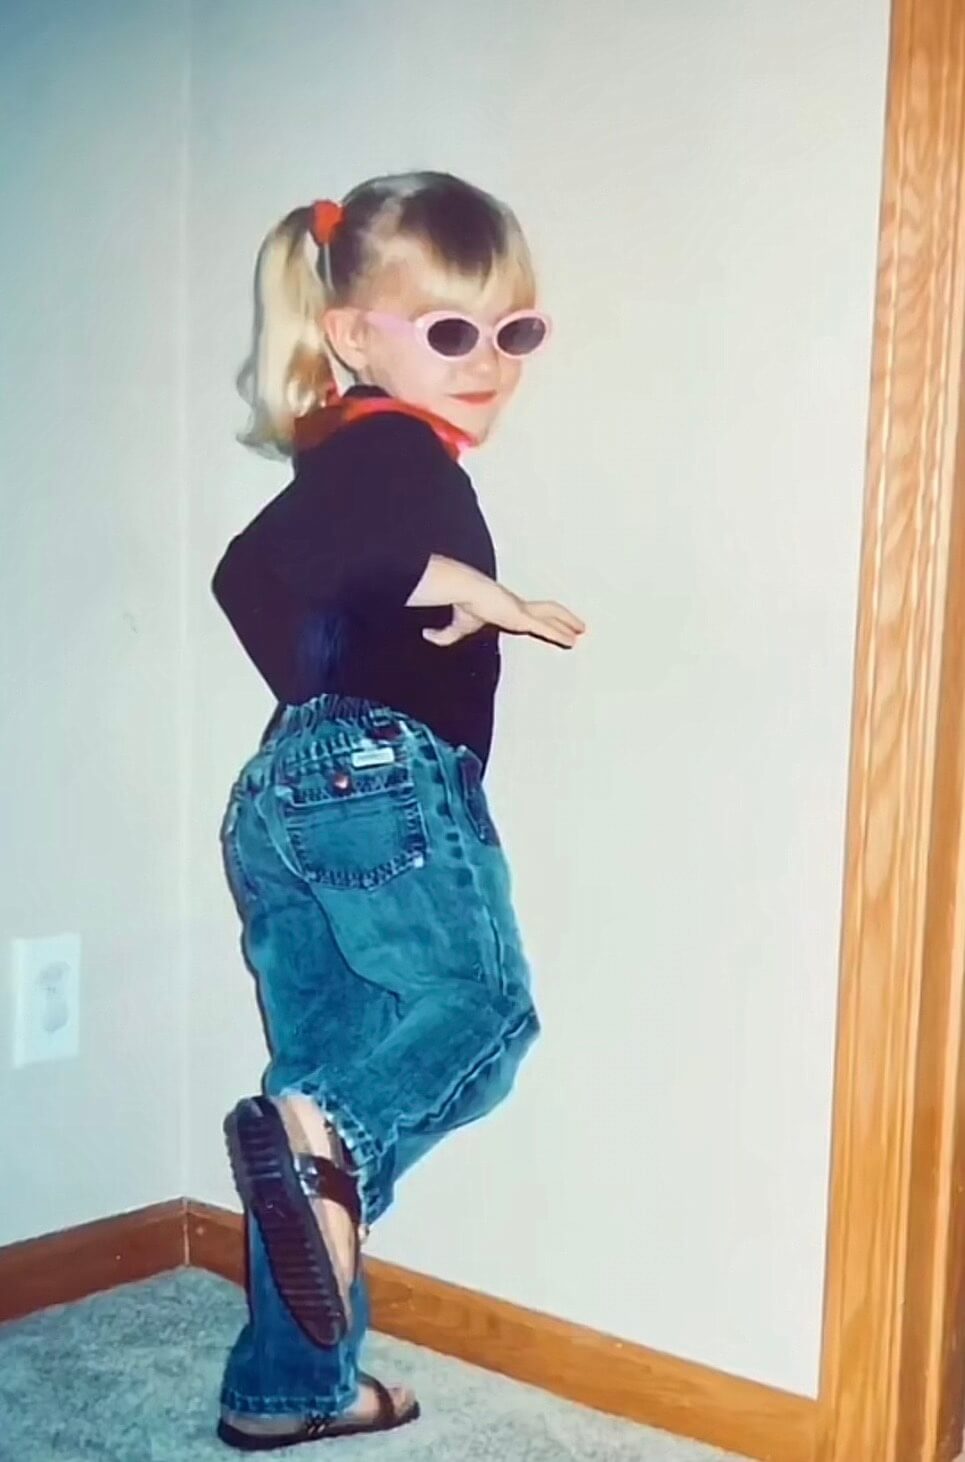 Young Kendall Lienemann, decked out in fashion forward jeans, black shirt, pink rimmed glasses, pigtails and red accents